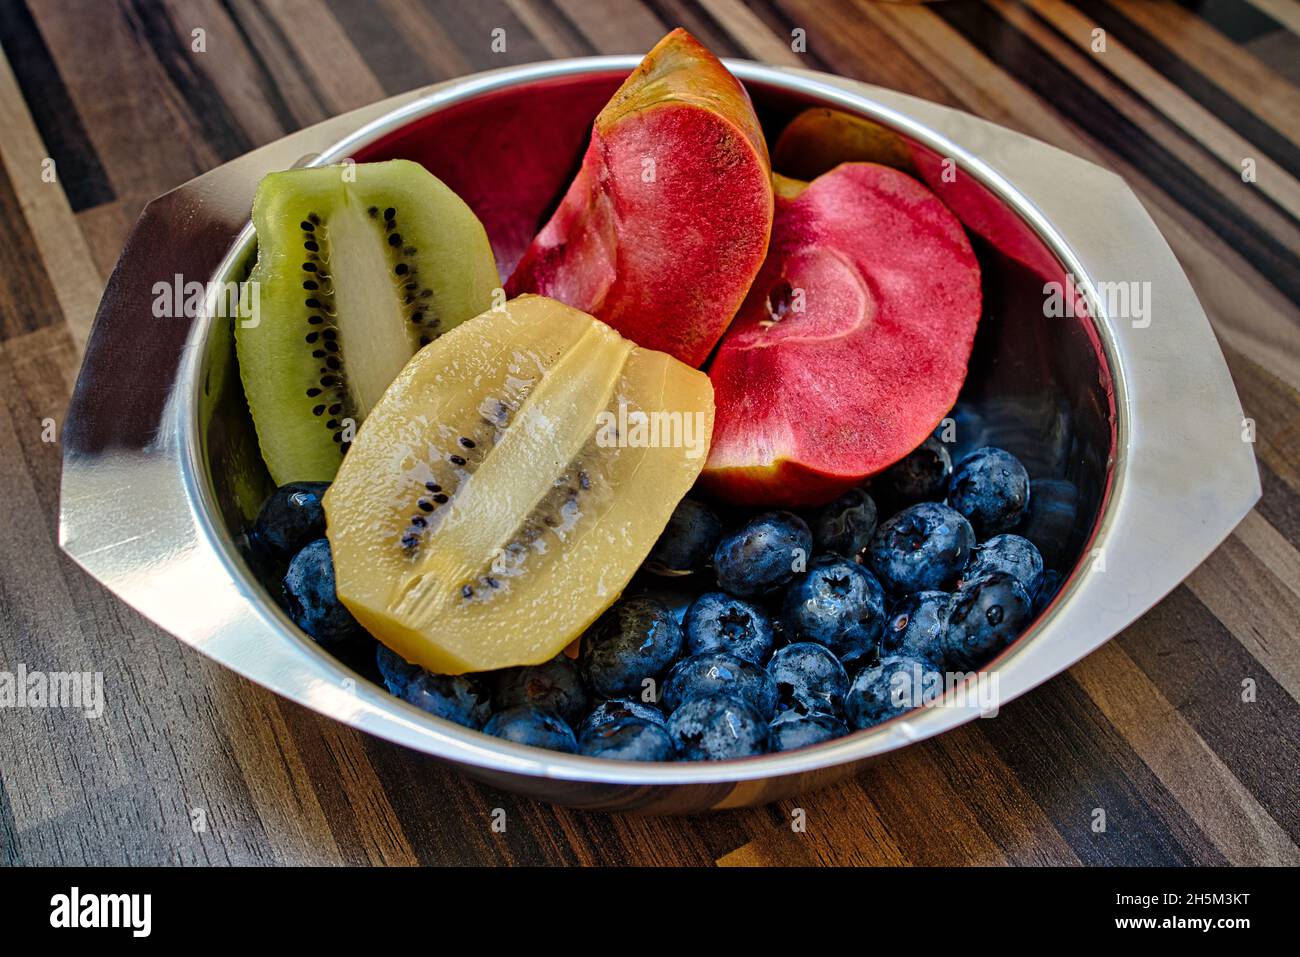 halved green and kiwis, blueberries and an apple called red moon in a stainless steel on a table Photo - Alamy